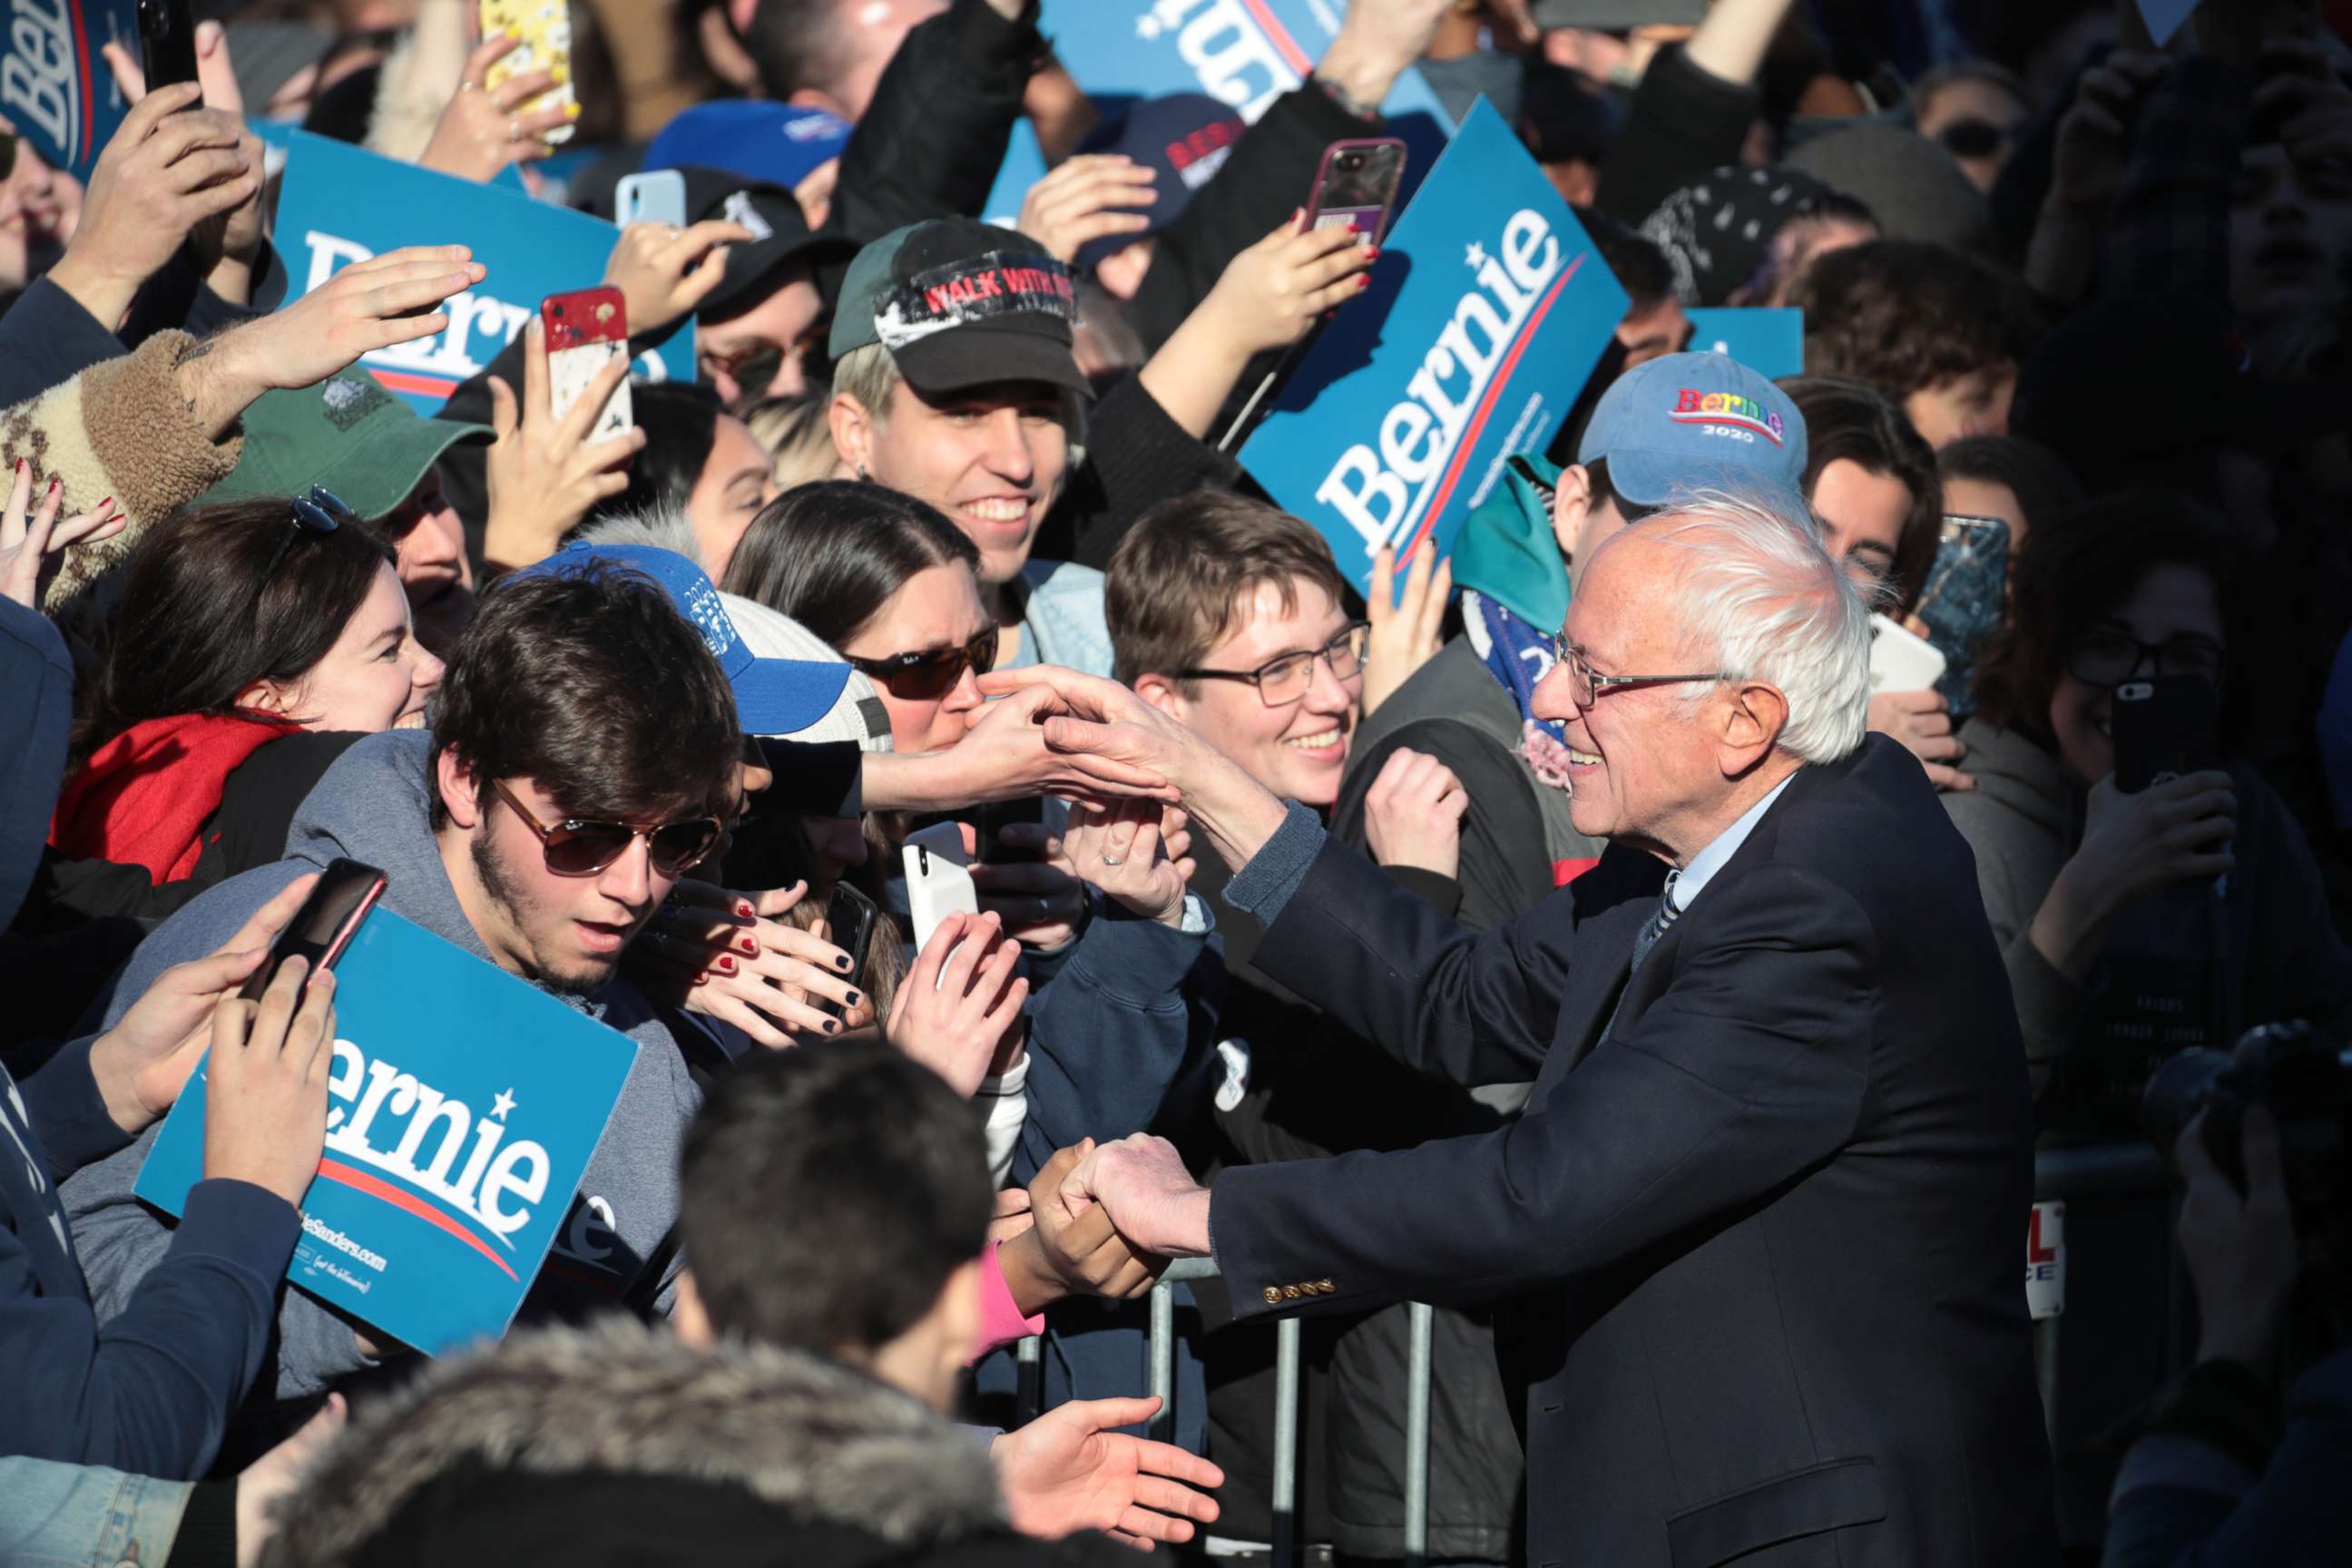 PHOTO: Democratic presidential candidate Sen. Bernie Sanders greets supporters as he leaves a campaign rally in Grant Park, March 7, 2020 in Chicago.